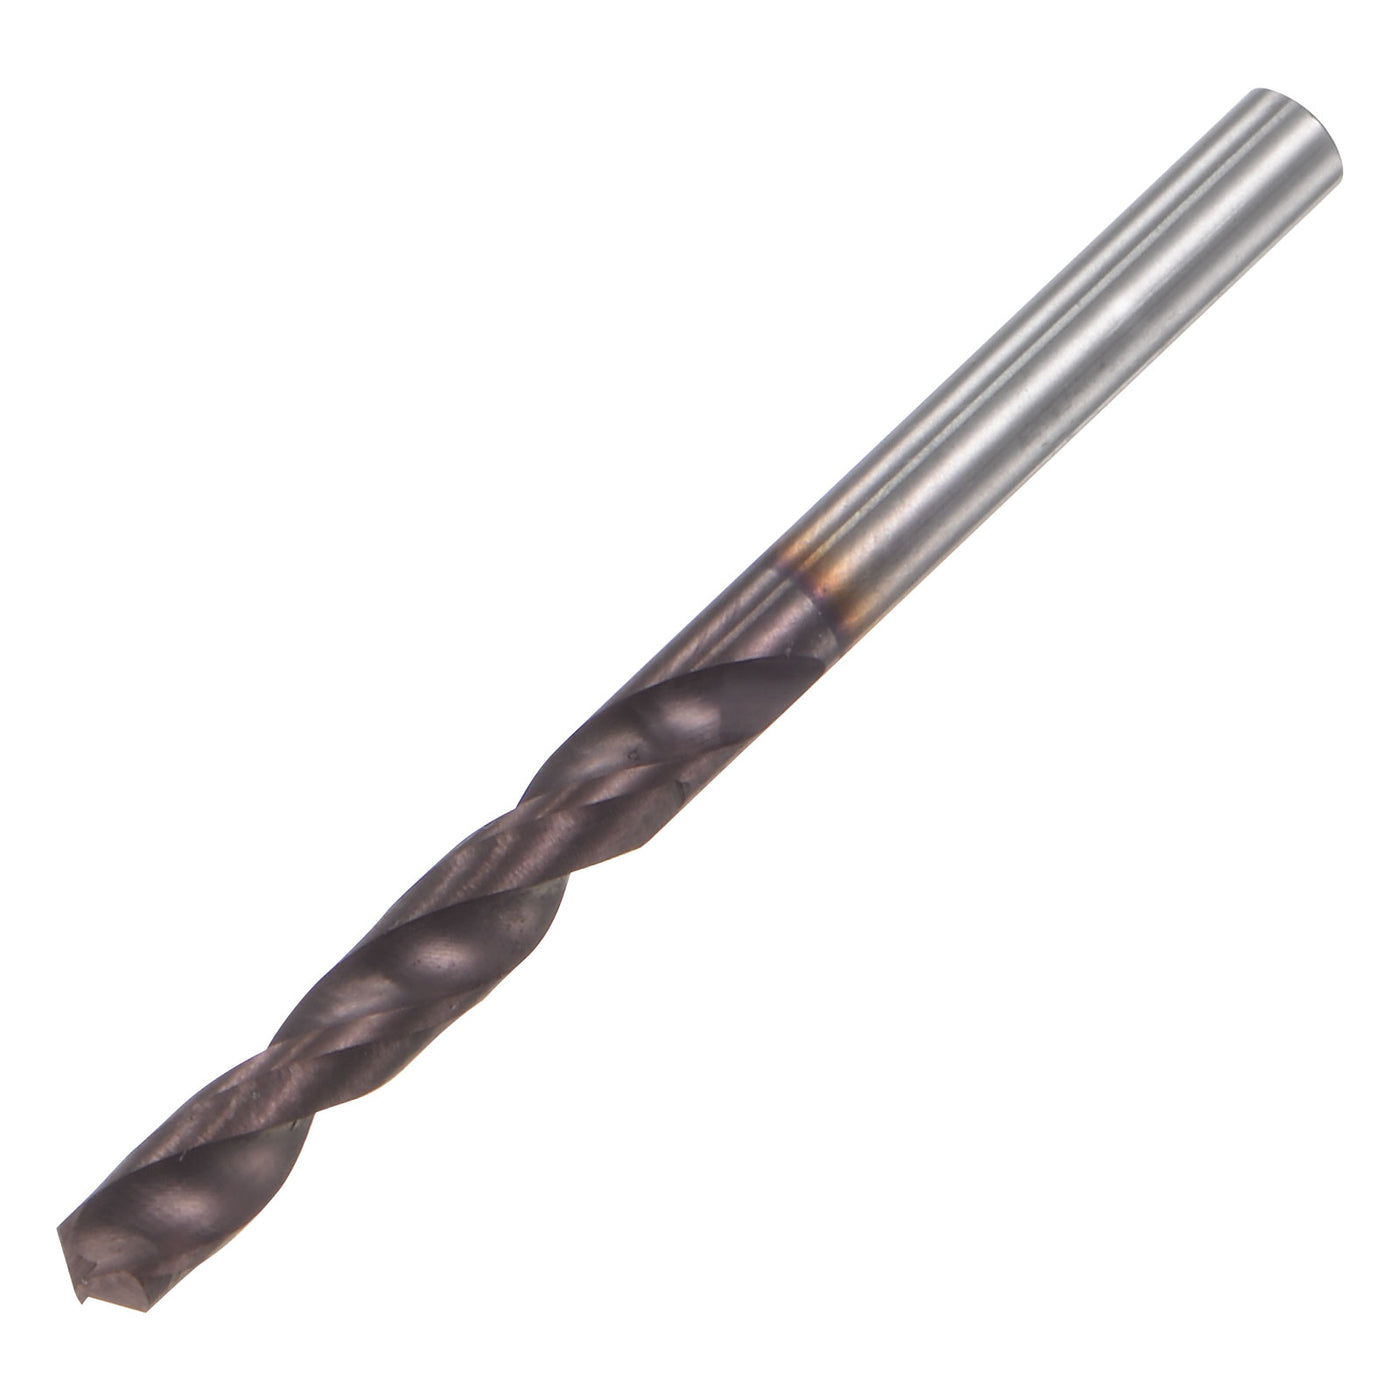 uxcell Uxcell 2.8mm DIN K45 Tungsten Carbide AlTiSin Coated Drill Bit for Stainless Steel